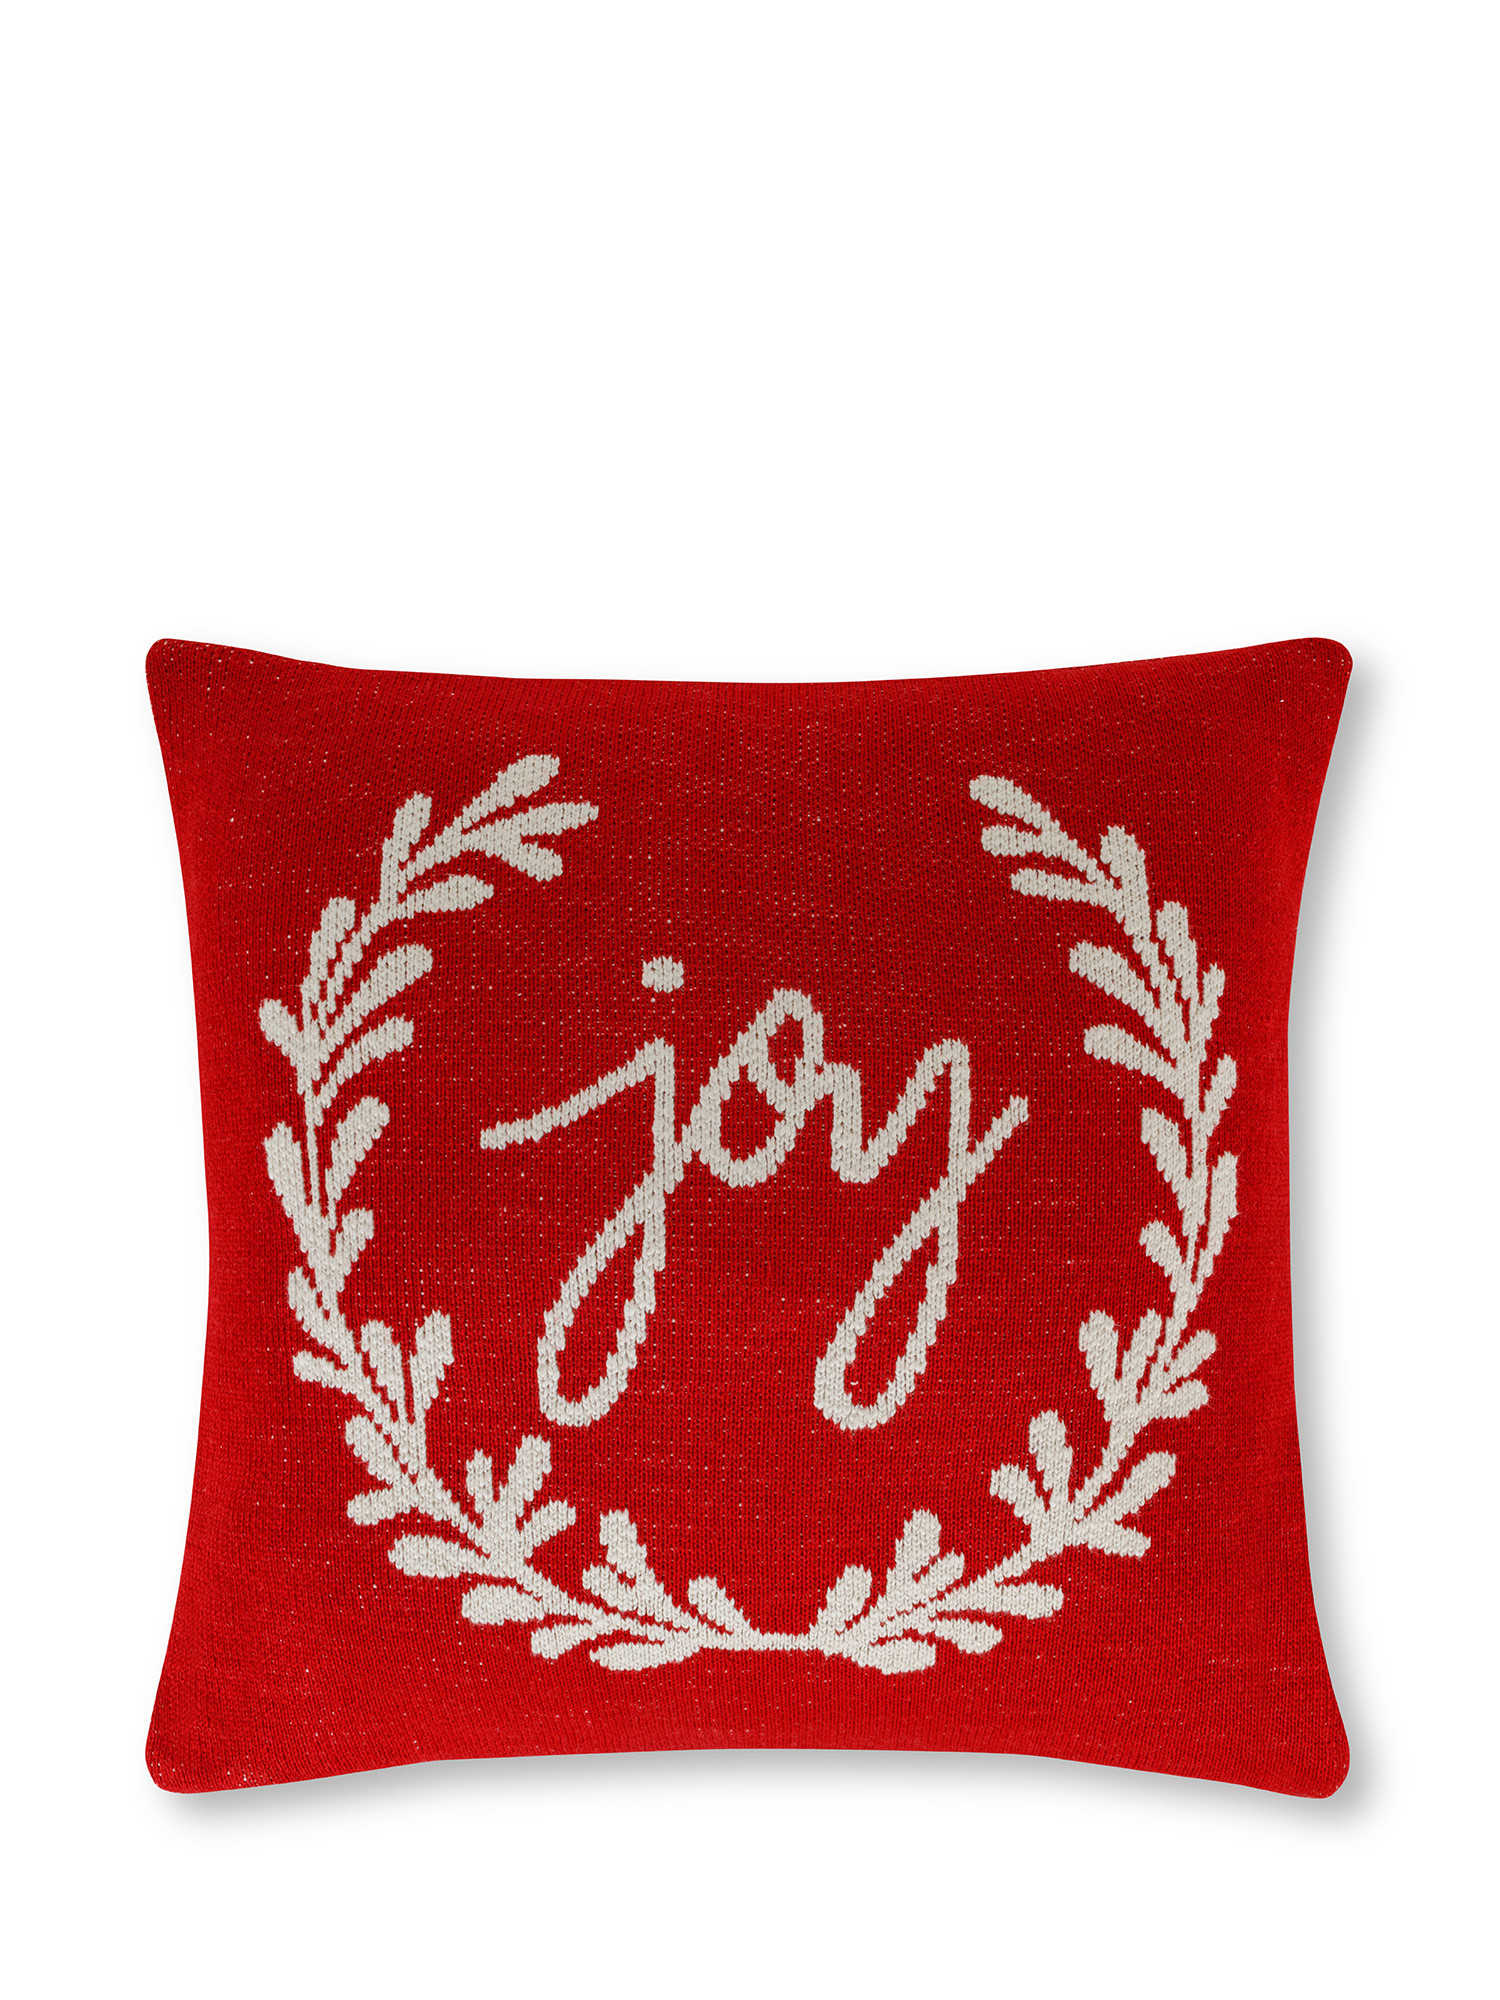 Jacquard knit cushion with joy garland 45x45 cm, Red, large image number 0